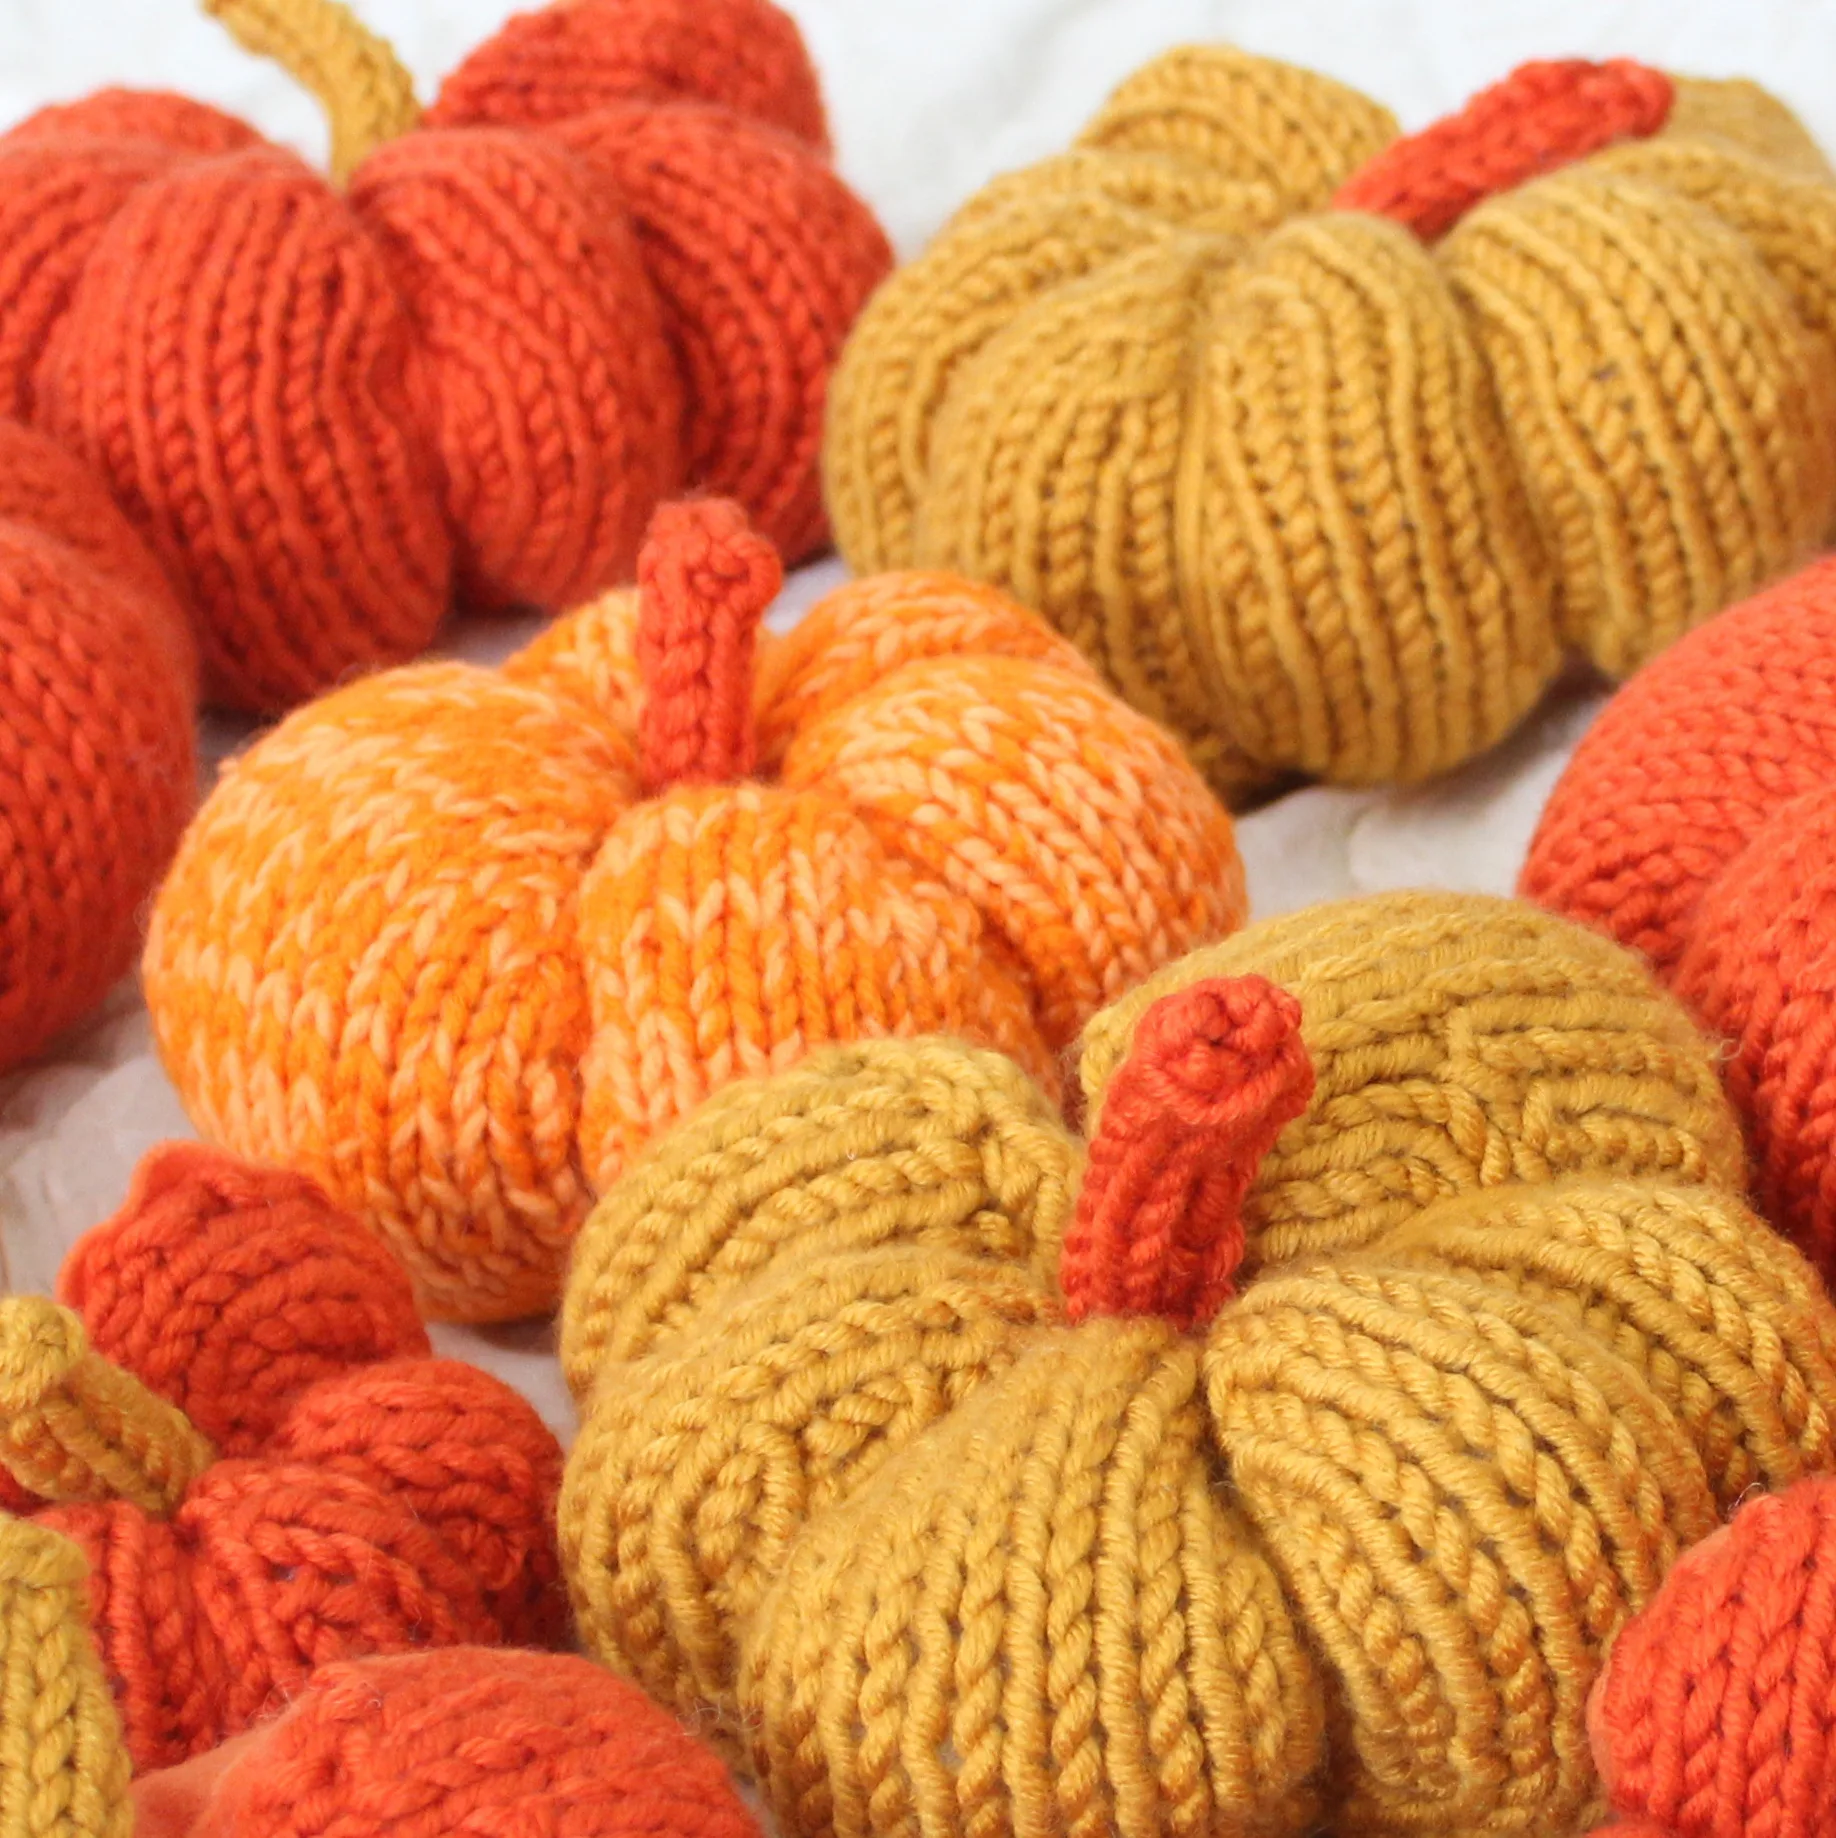 Knitted pumpkin softies in yellow and orange yarn colors.